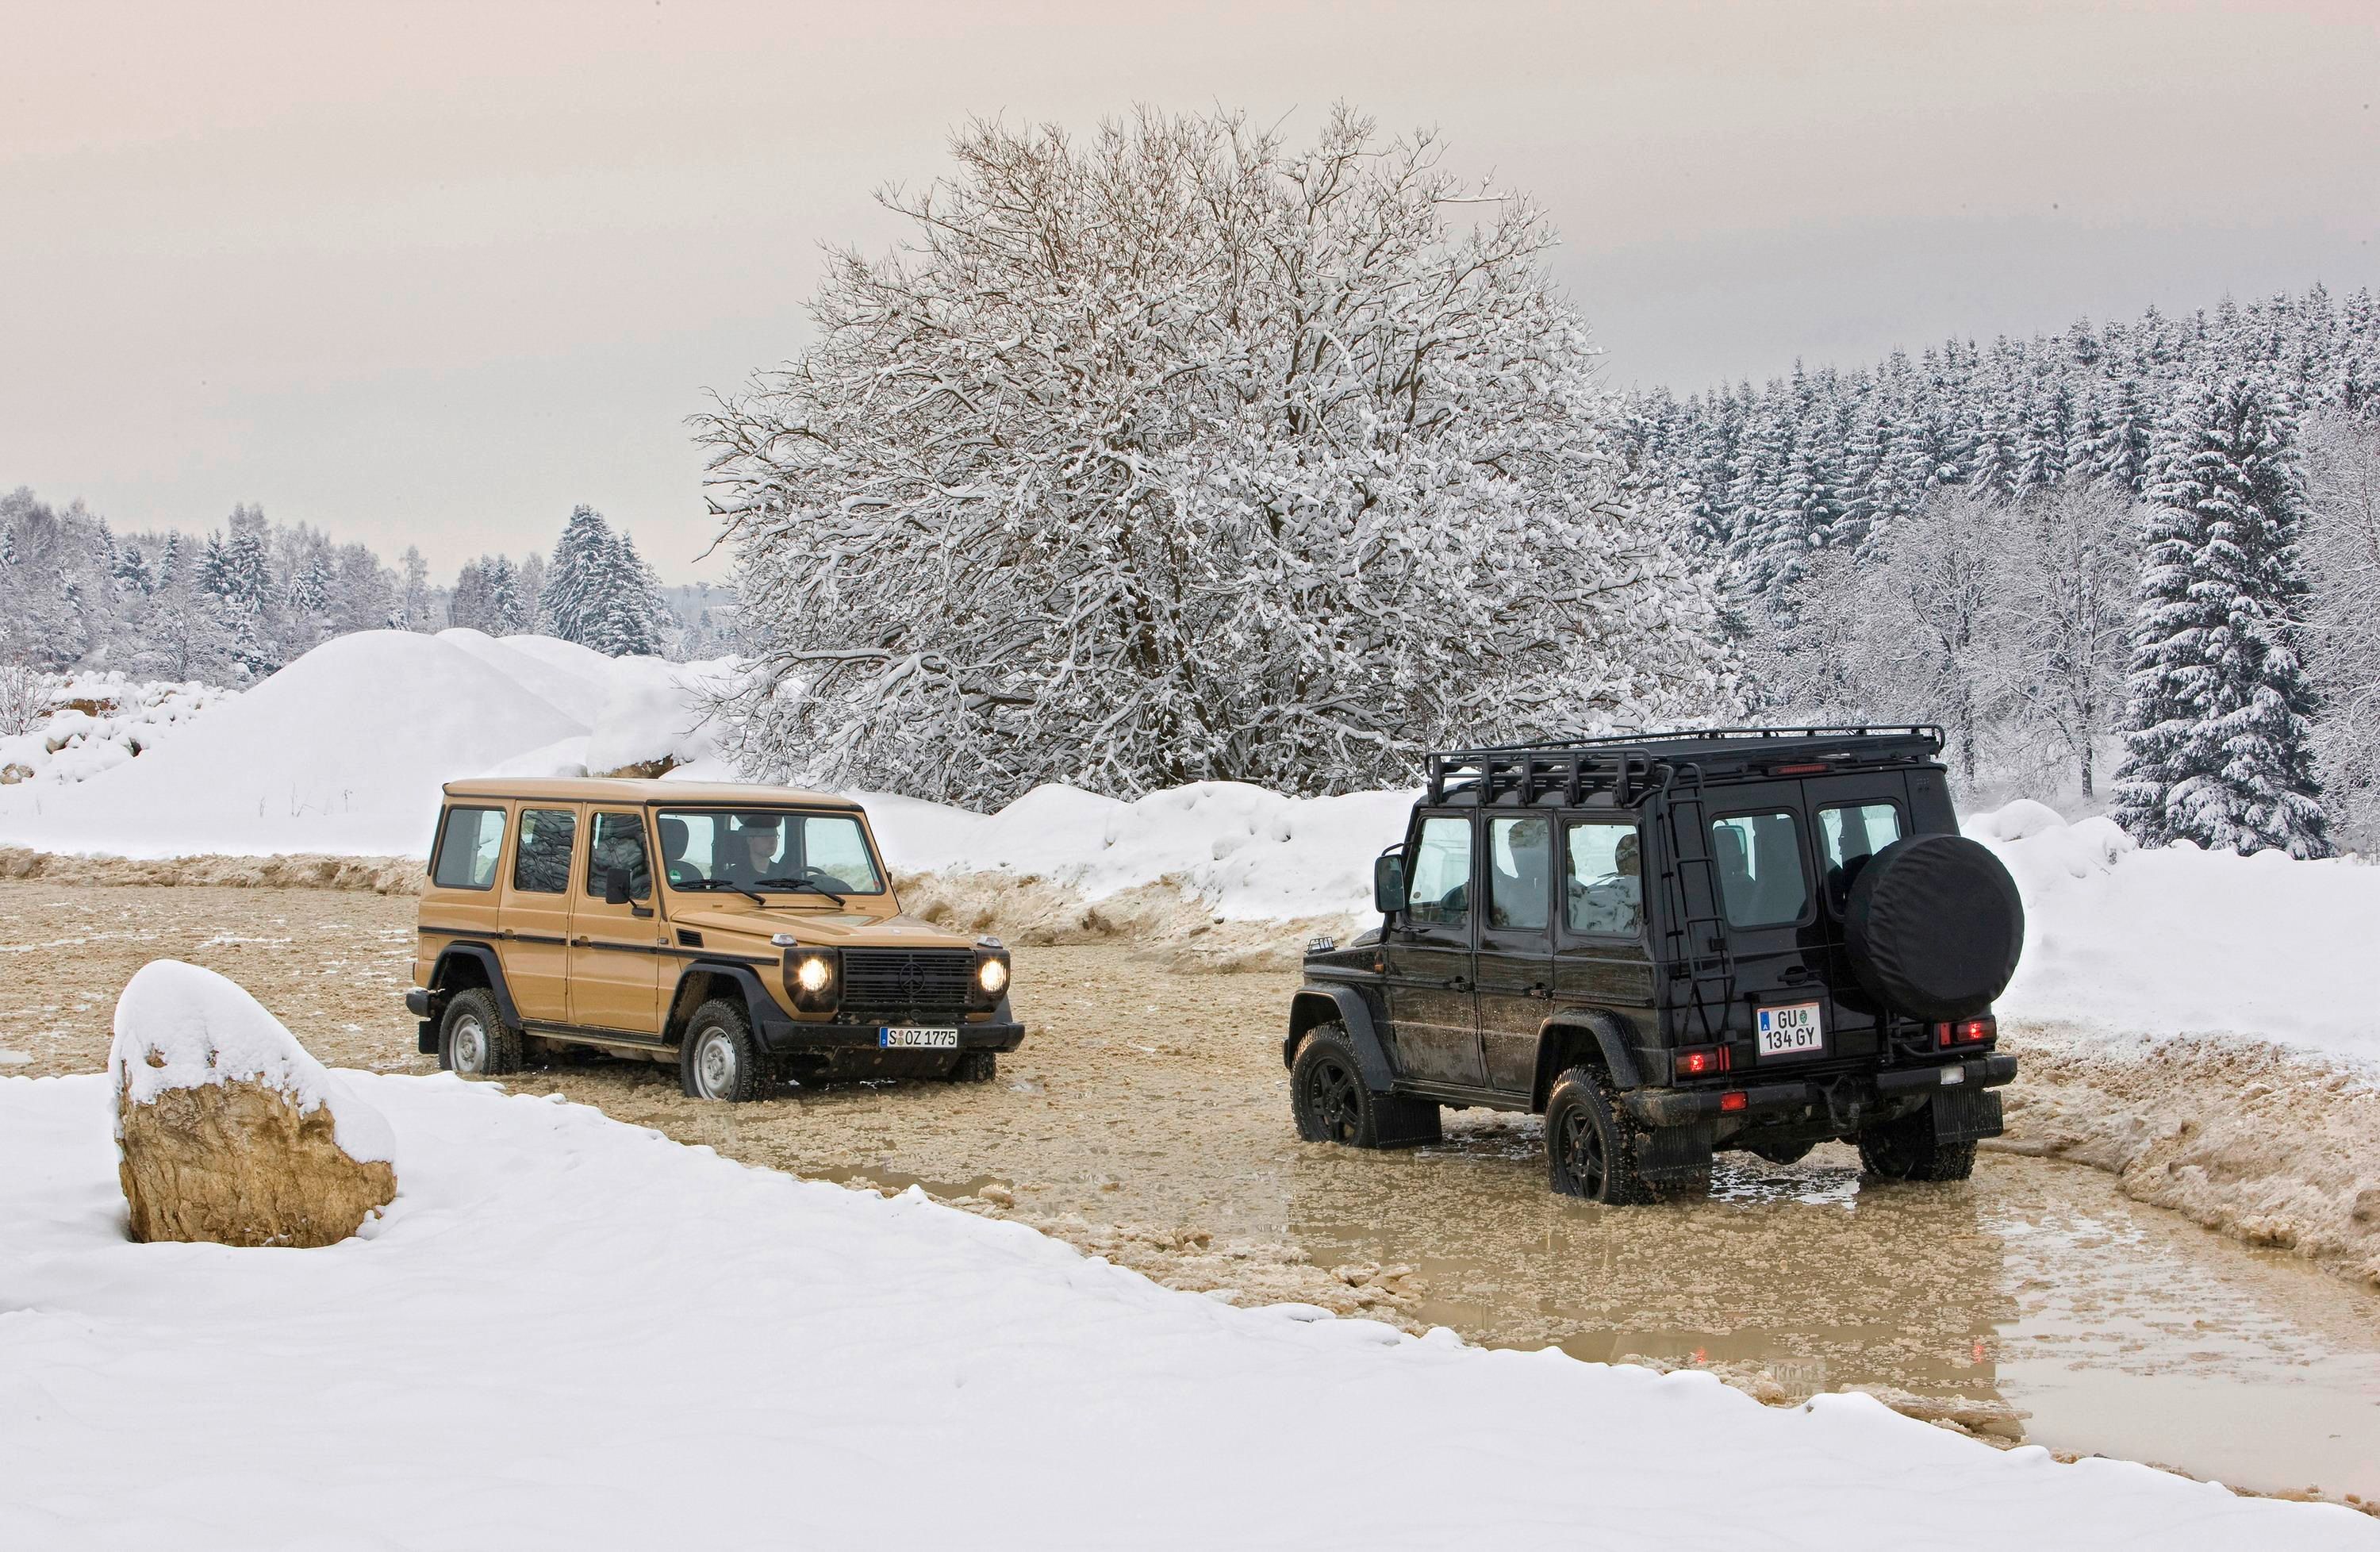 2009 Mercedes G-Class EDITION30 and G-Class EDITION30.PUR